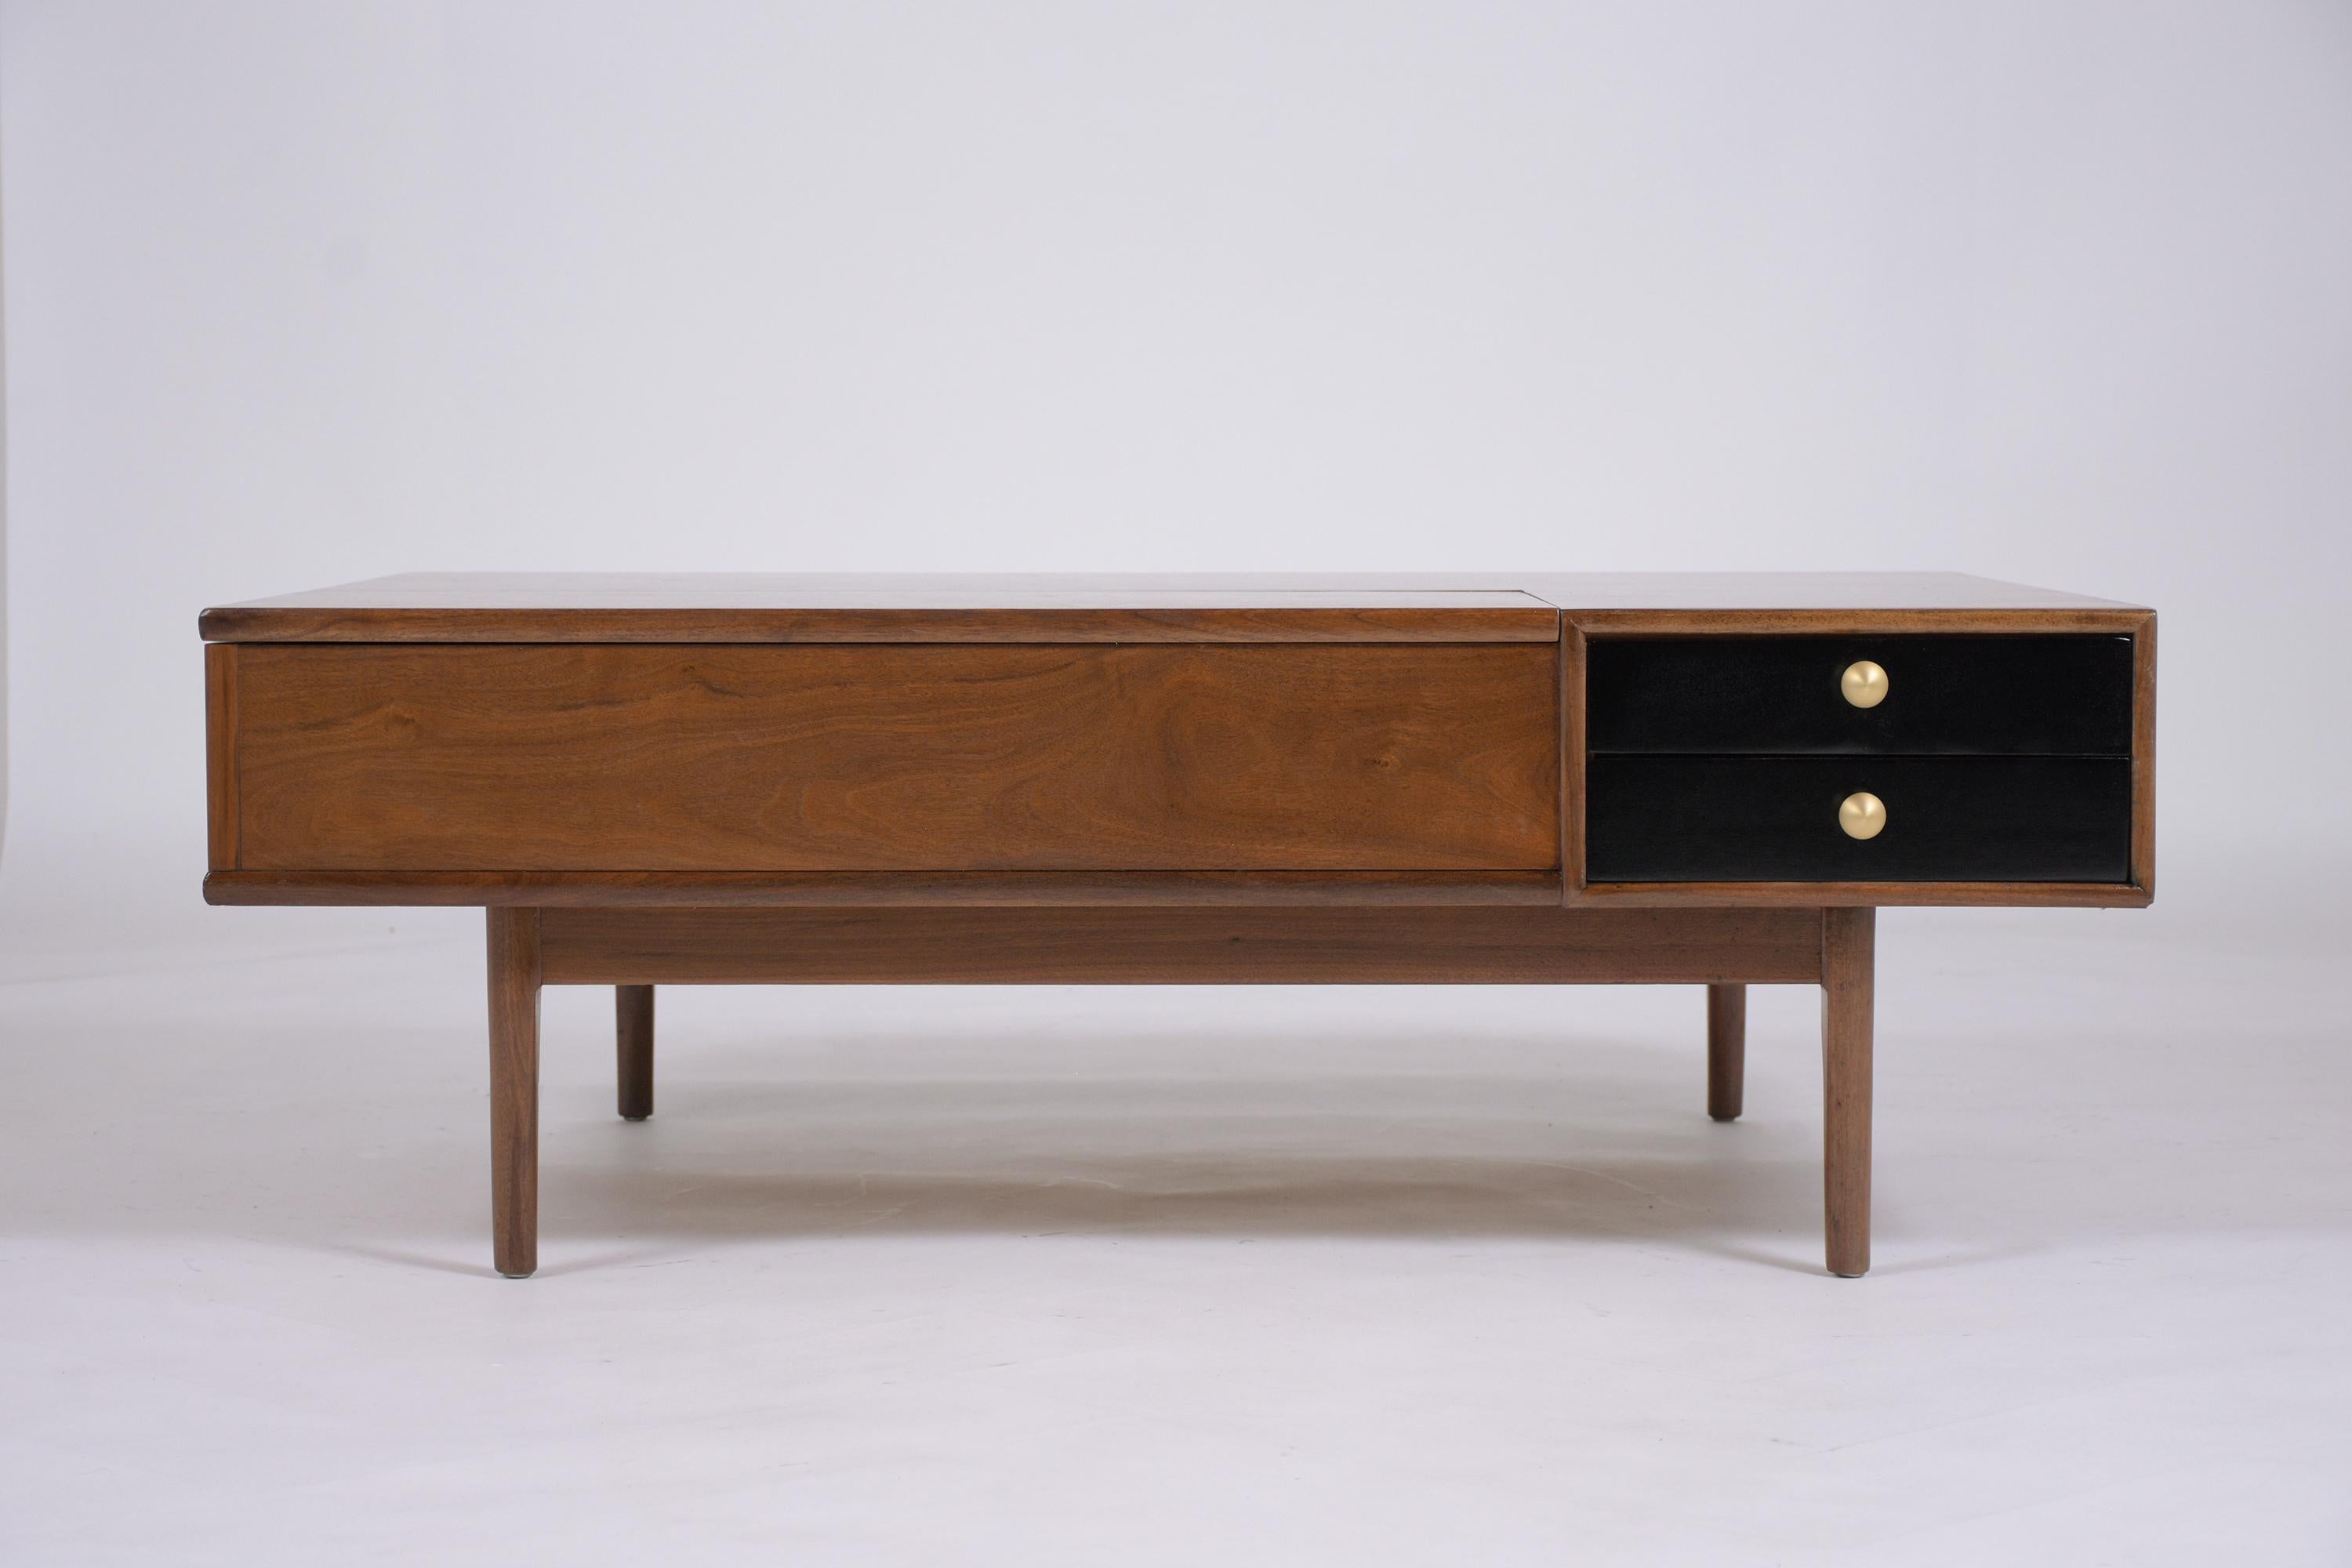 An extraordinary mid-century modern rectangular walnut coffee table beautifully crafted in walnut wood that has been fully restored by our team of professional craftsmen. This unique coffee table features a sleek design stained in dark walnut and